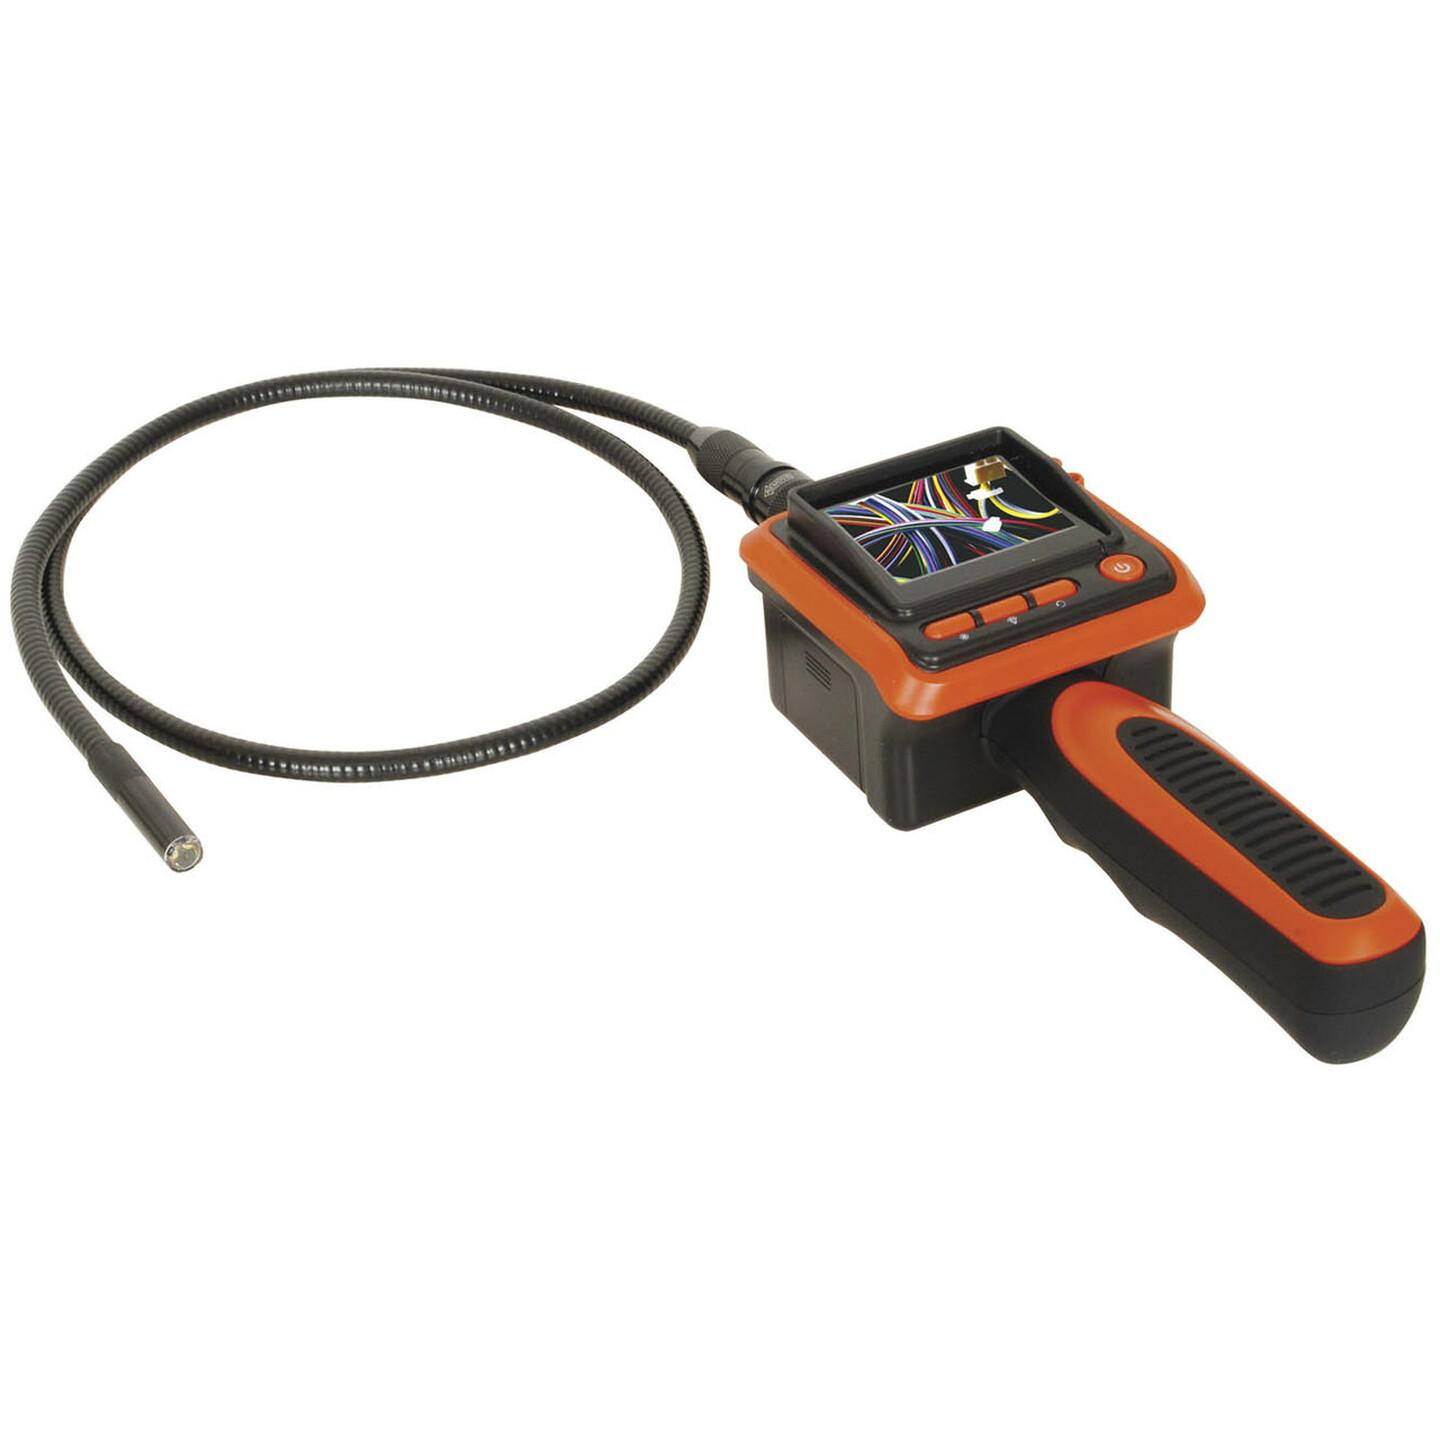 Inspection Camera with 9mm Camera Head and 2.4 Inch LCD